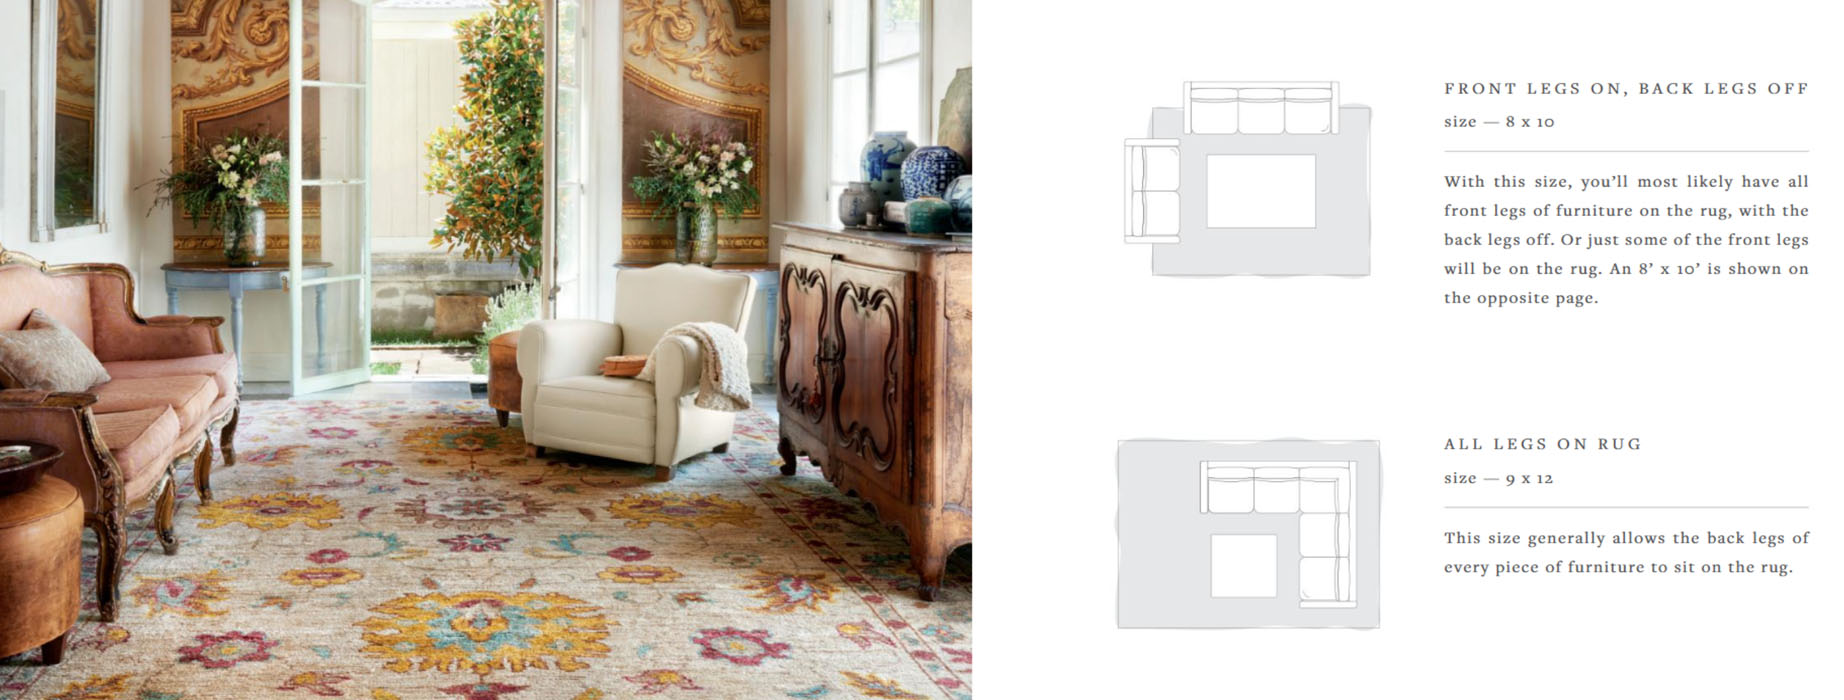 Choose the right sized rug for your space with our handy Rugs-101 guide.